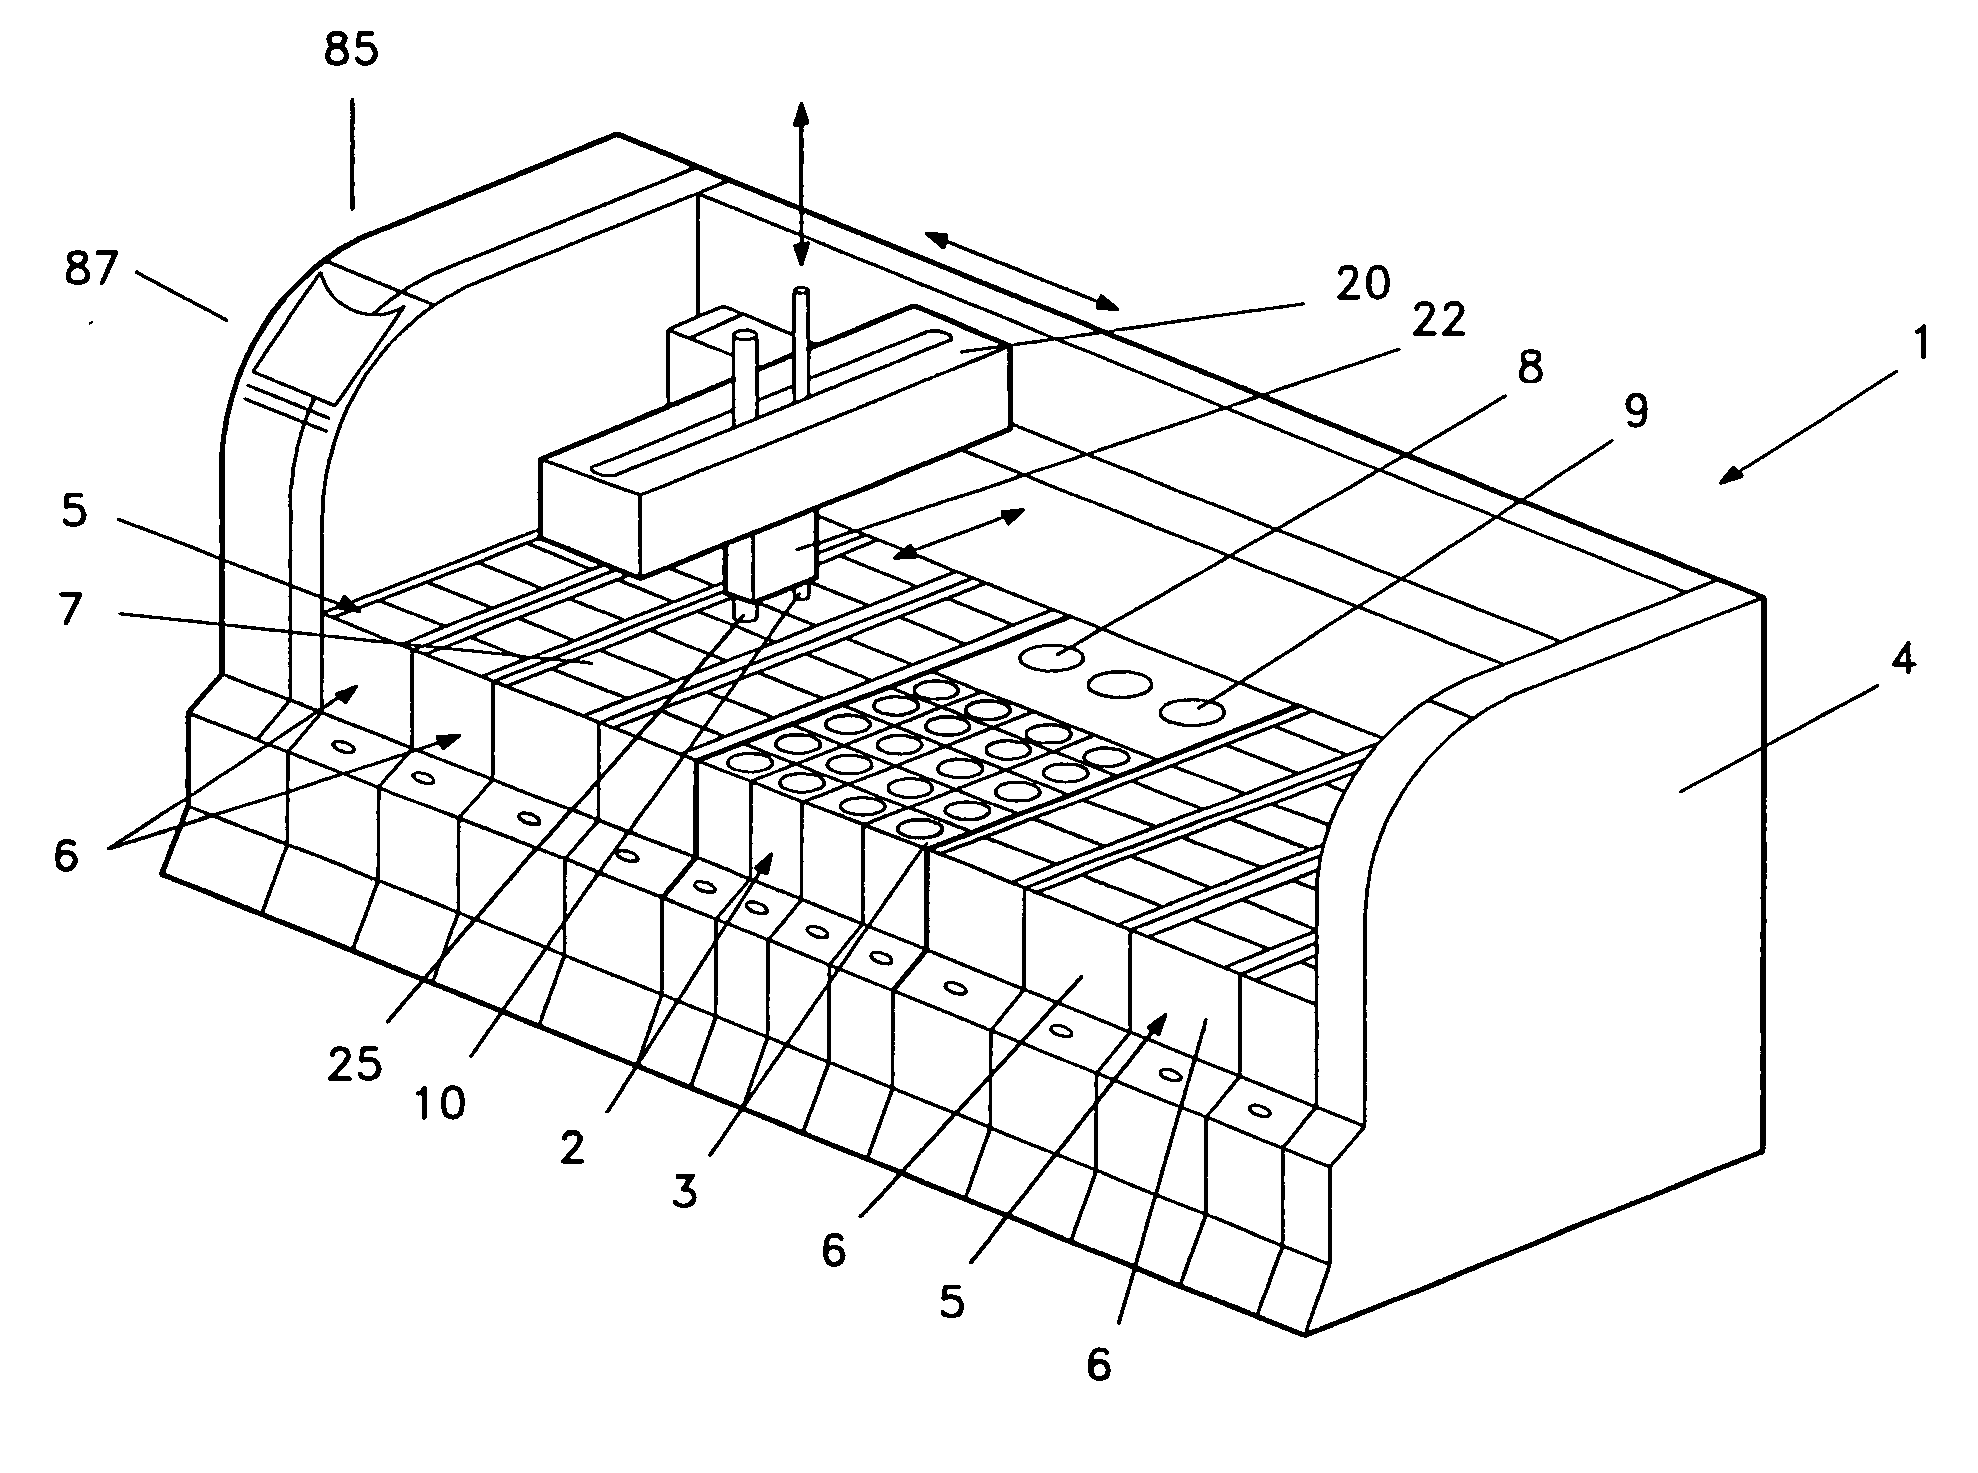 Automated sample processing apparatus and a method of automated treating of samples and use of such apparatus